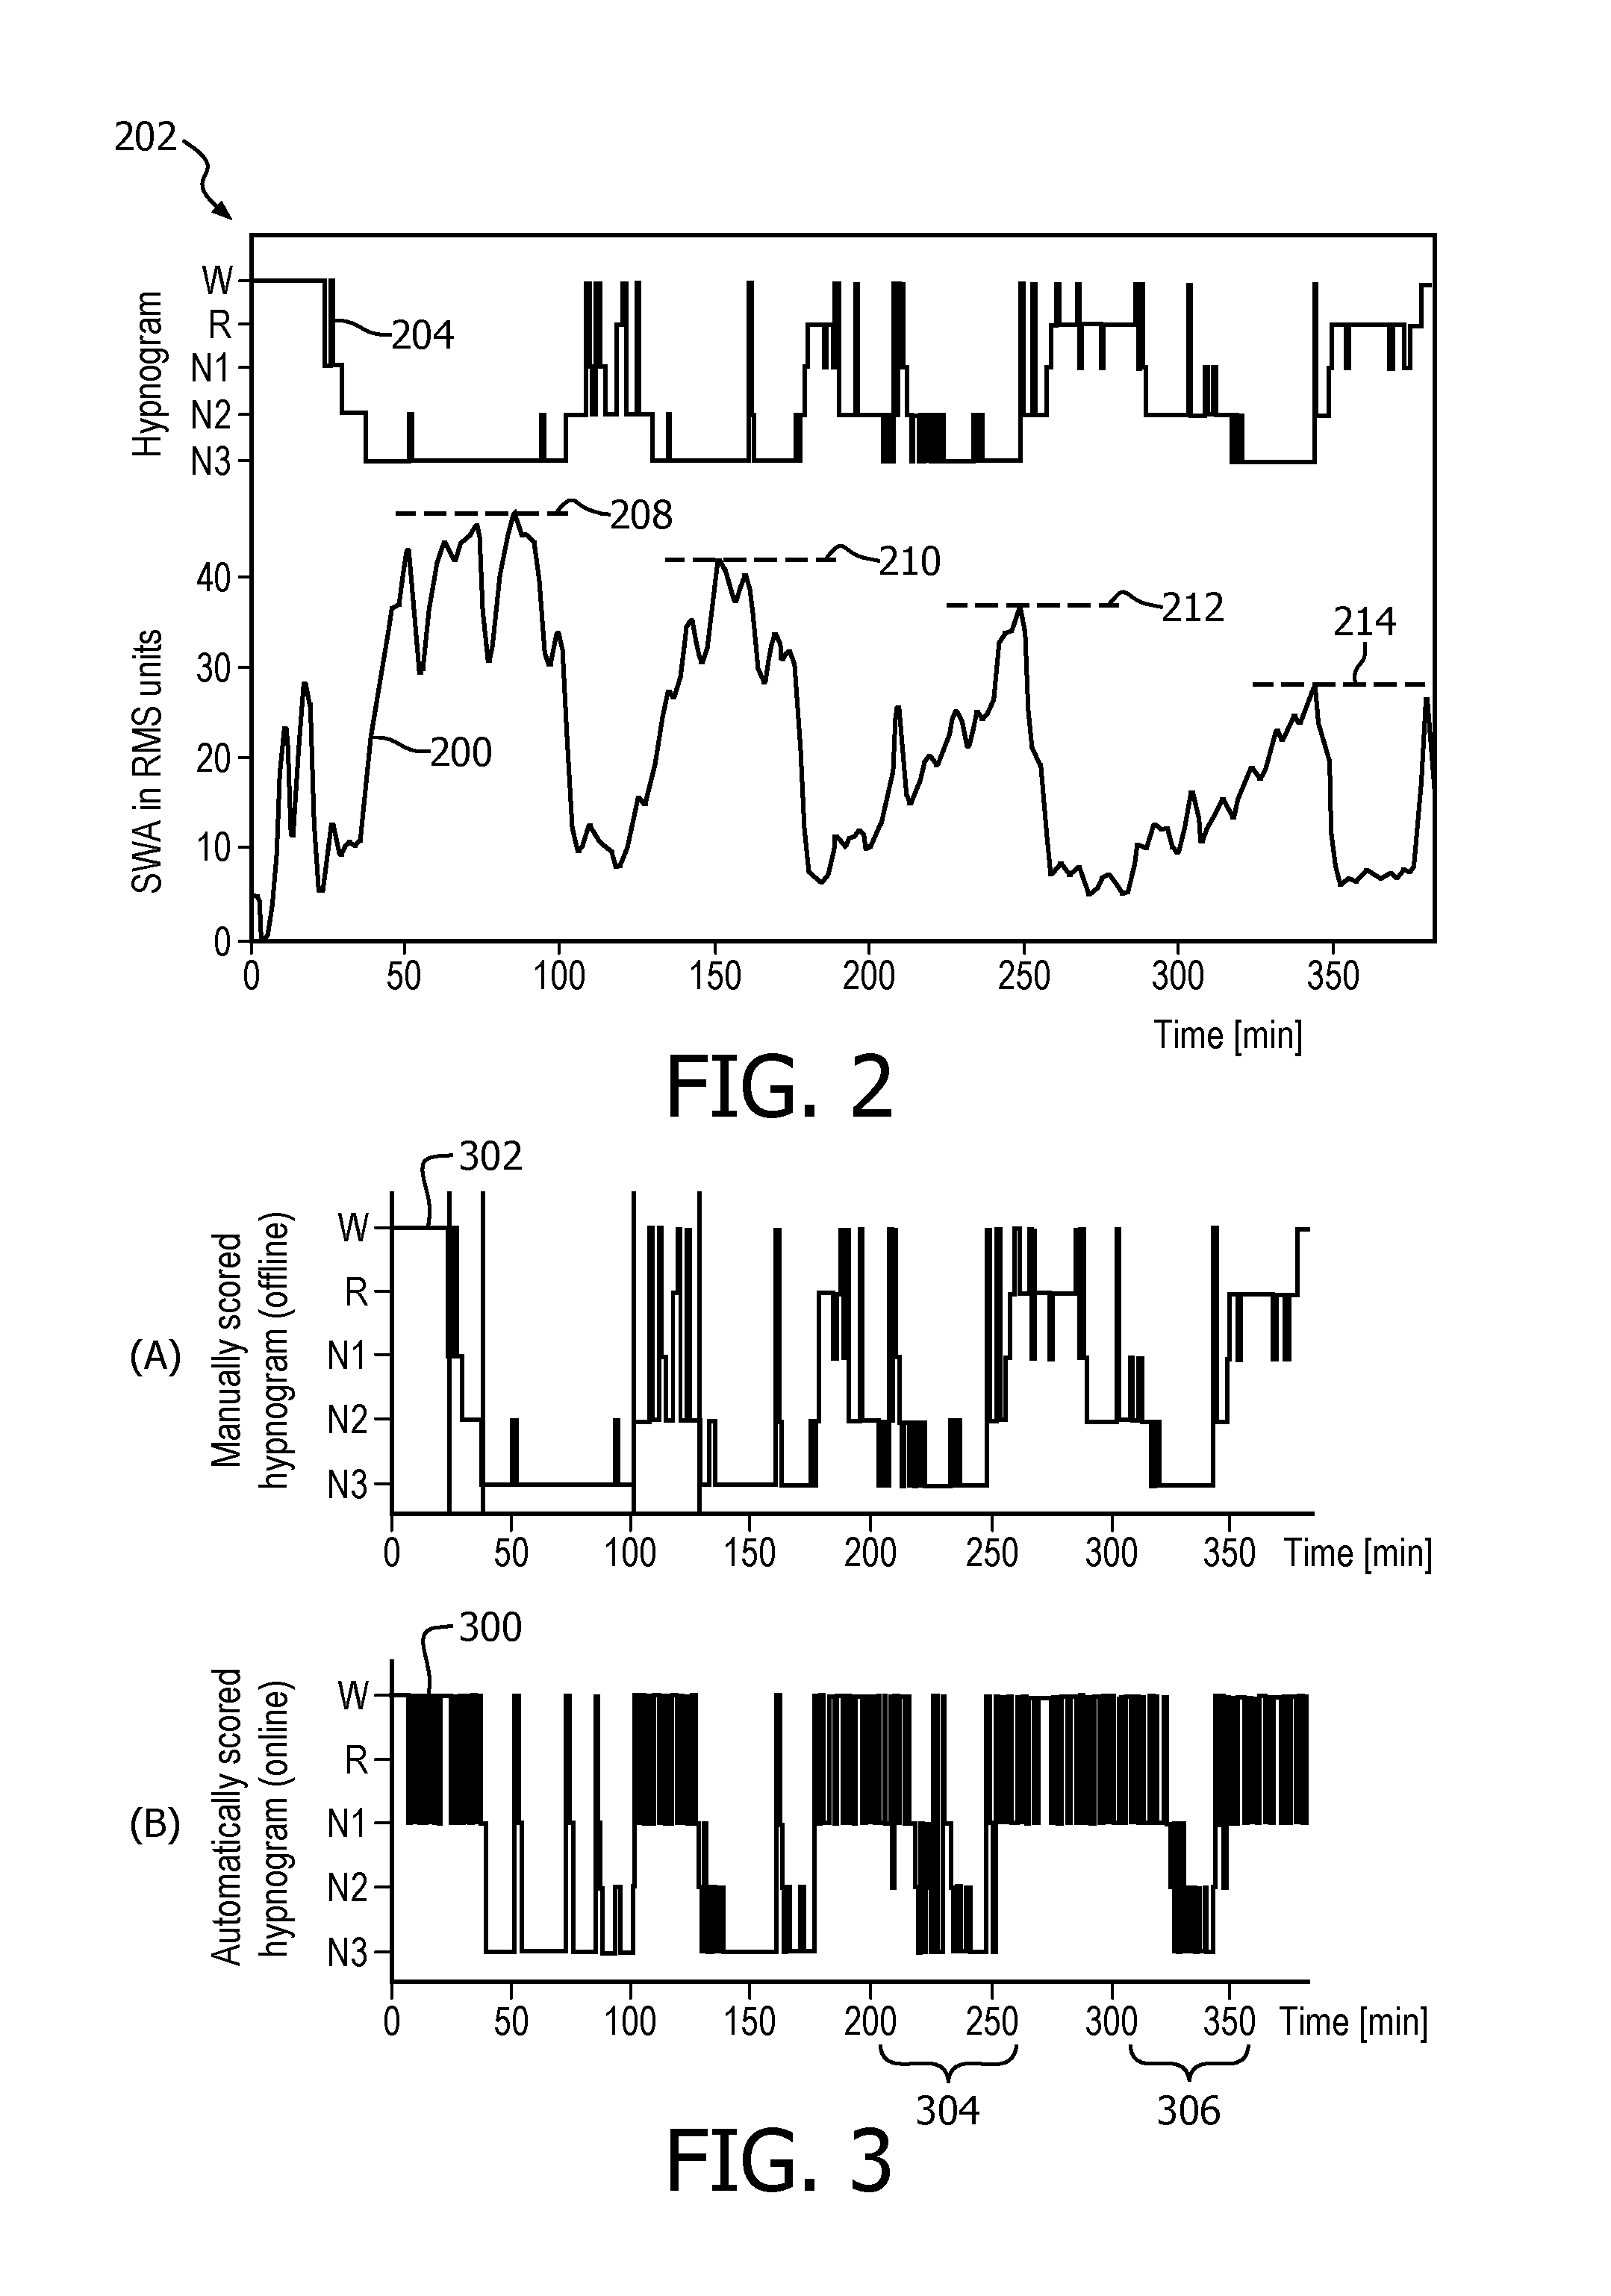 System and method for determining sleep stage based on sleep cycle